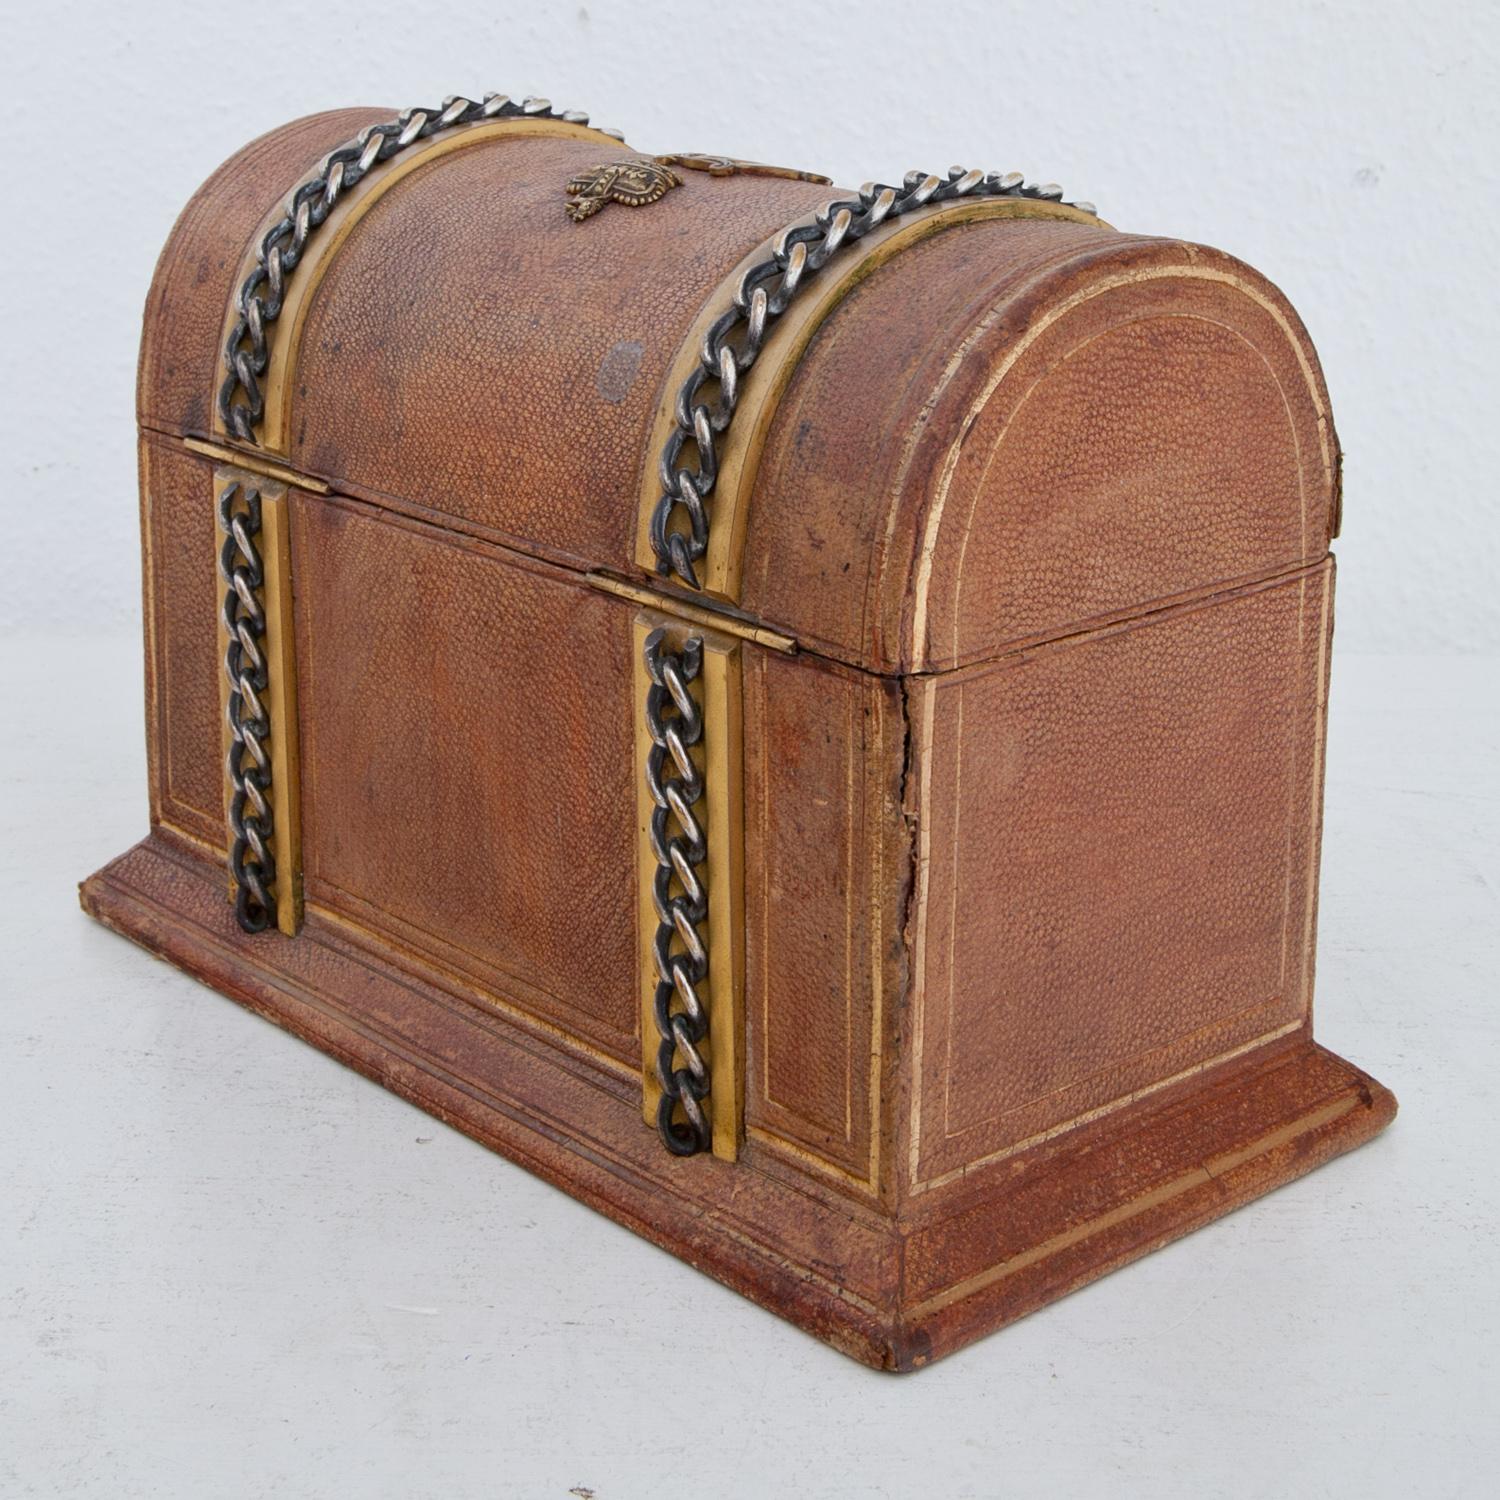 Faux Leather Documents and Writing Case, Breul and Rosenberg Vienna, Prob. Early 20th Century